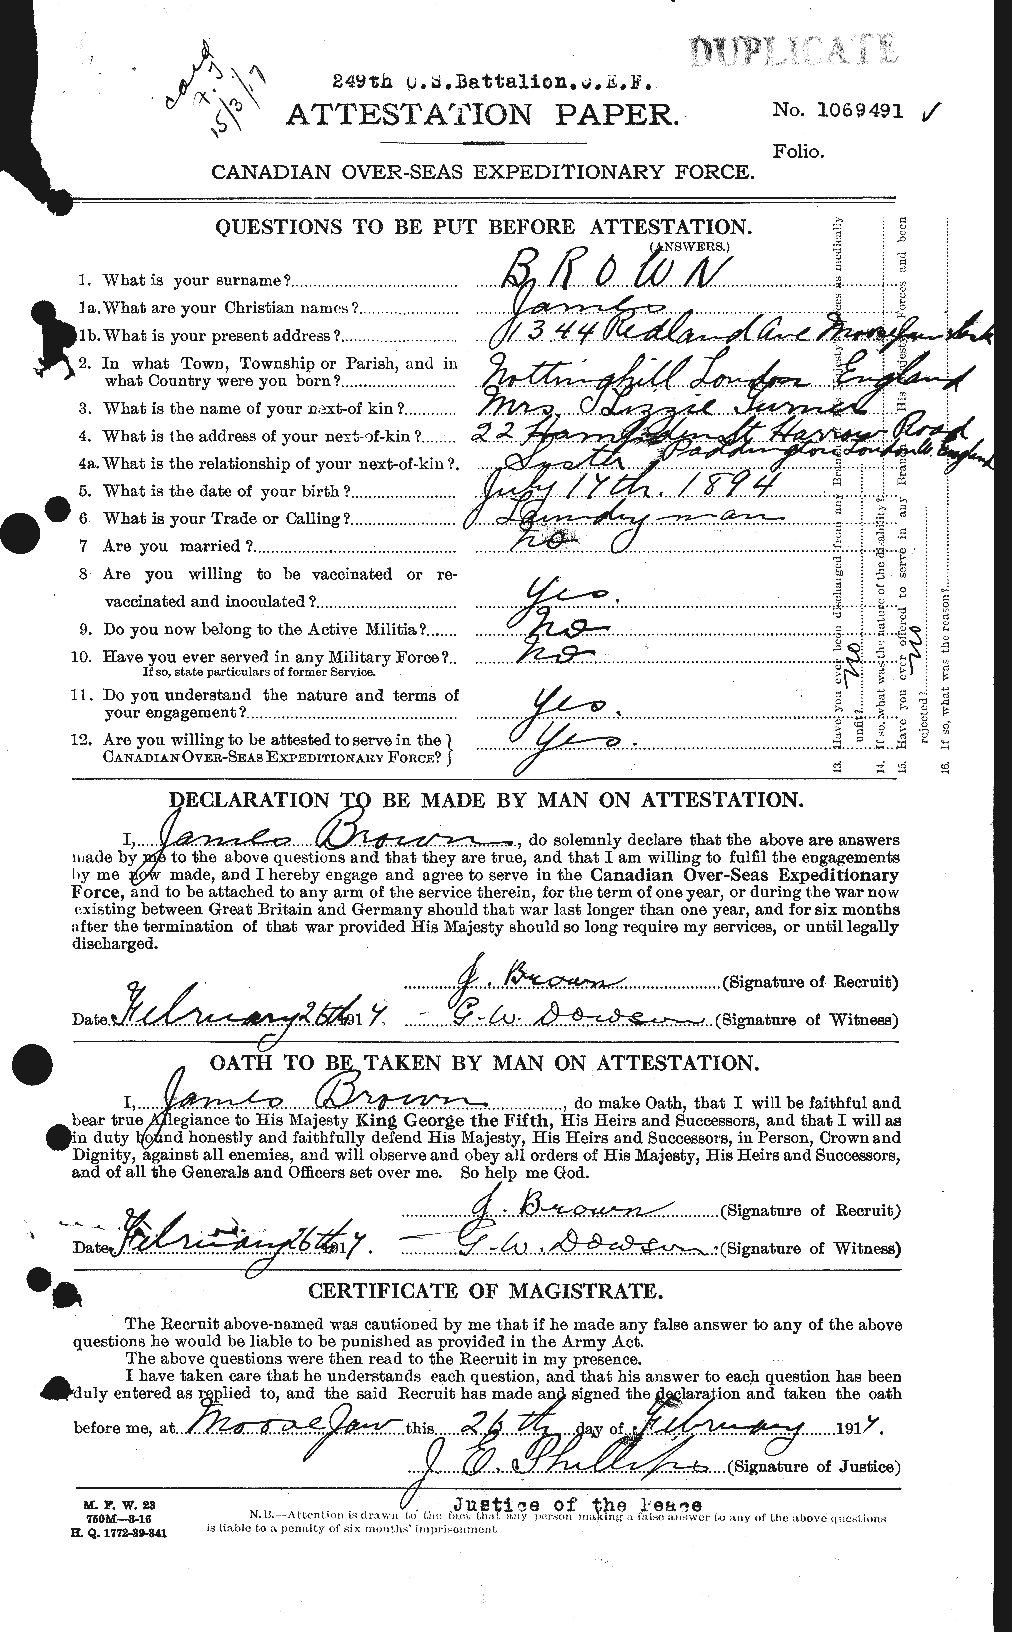 Personnel Records of the First World War - CEF 265780a